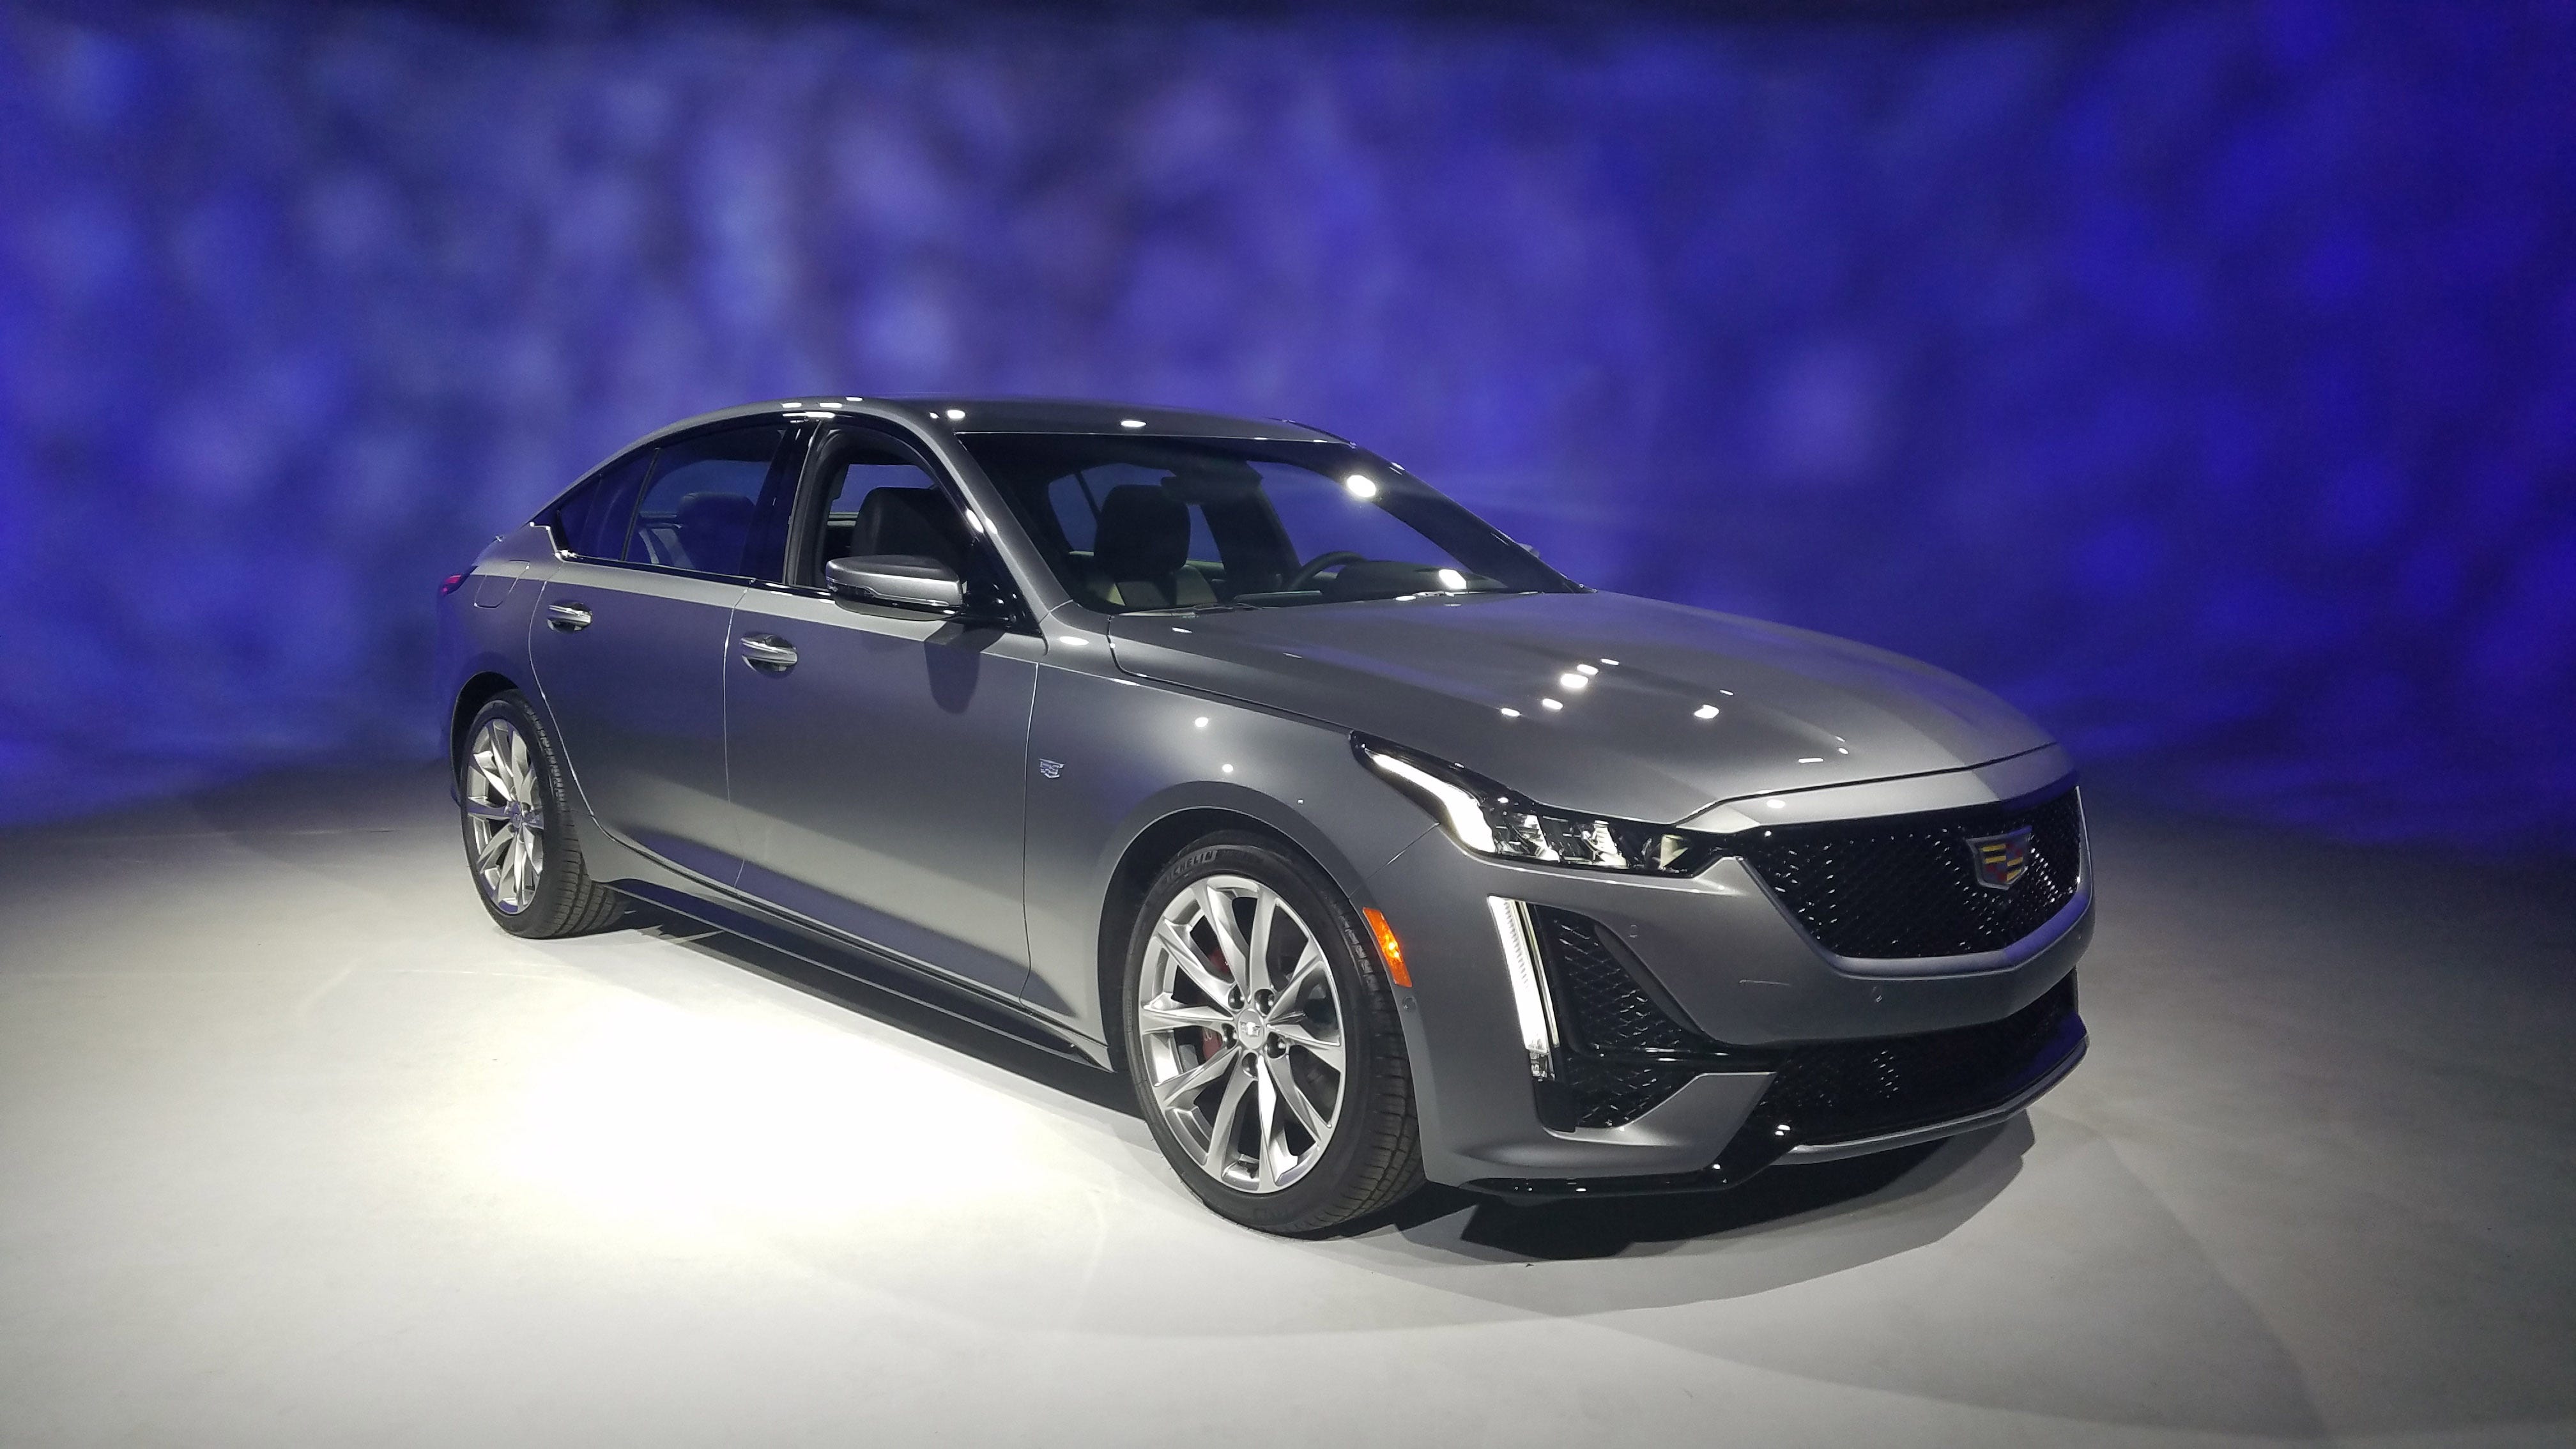 The 2020 Cadillac CT5 - shown here in Sport trim - will compete against the BMW 3-series in the compact car class.